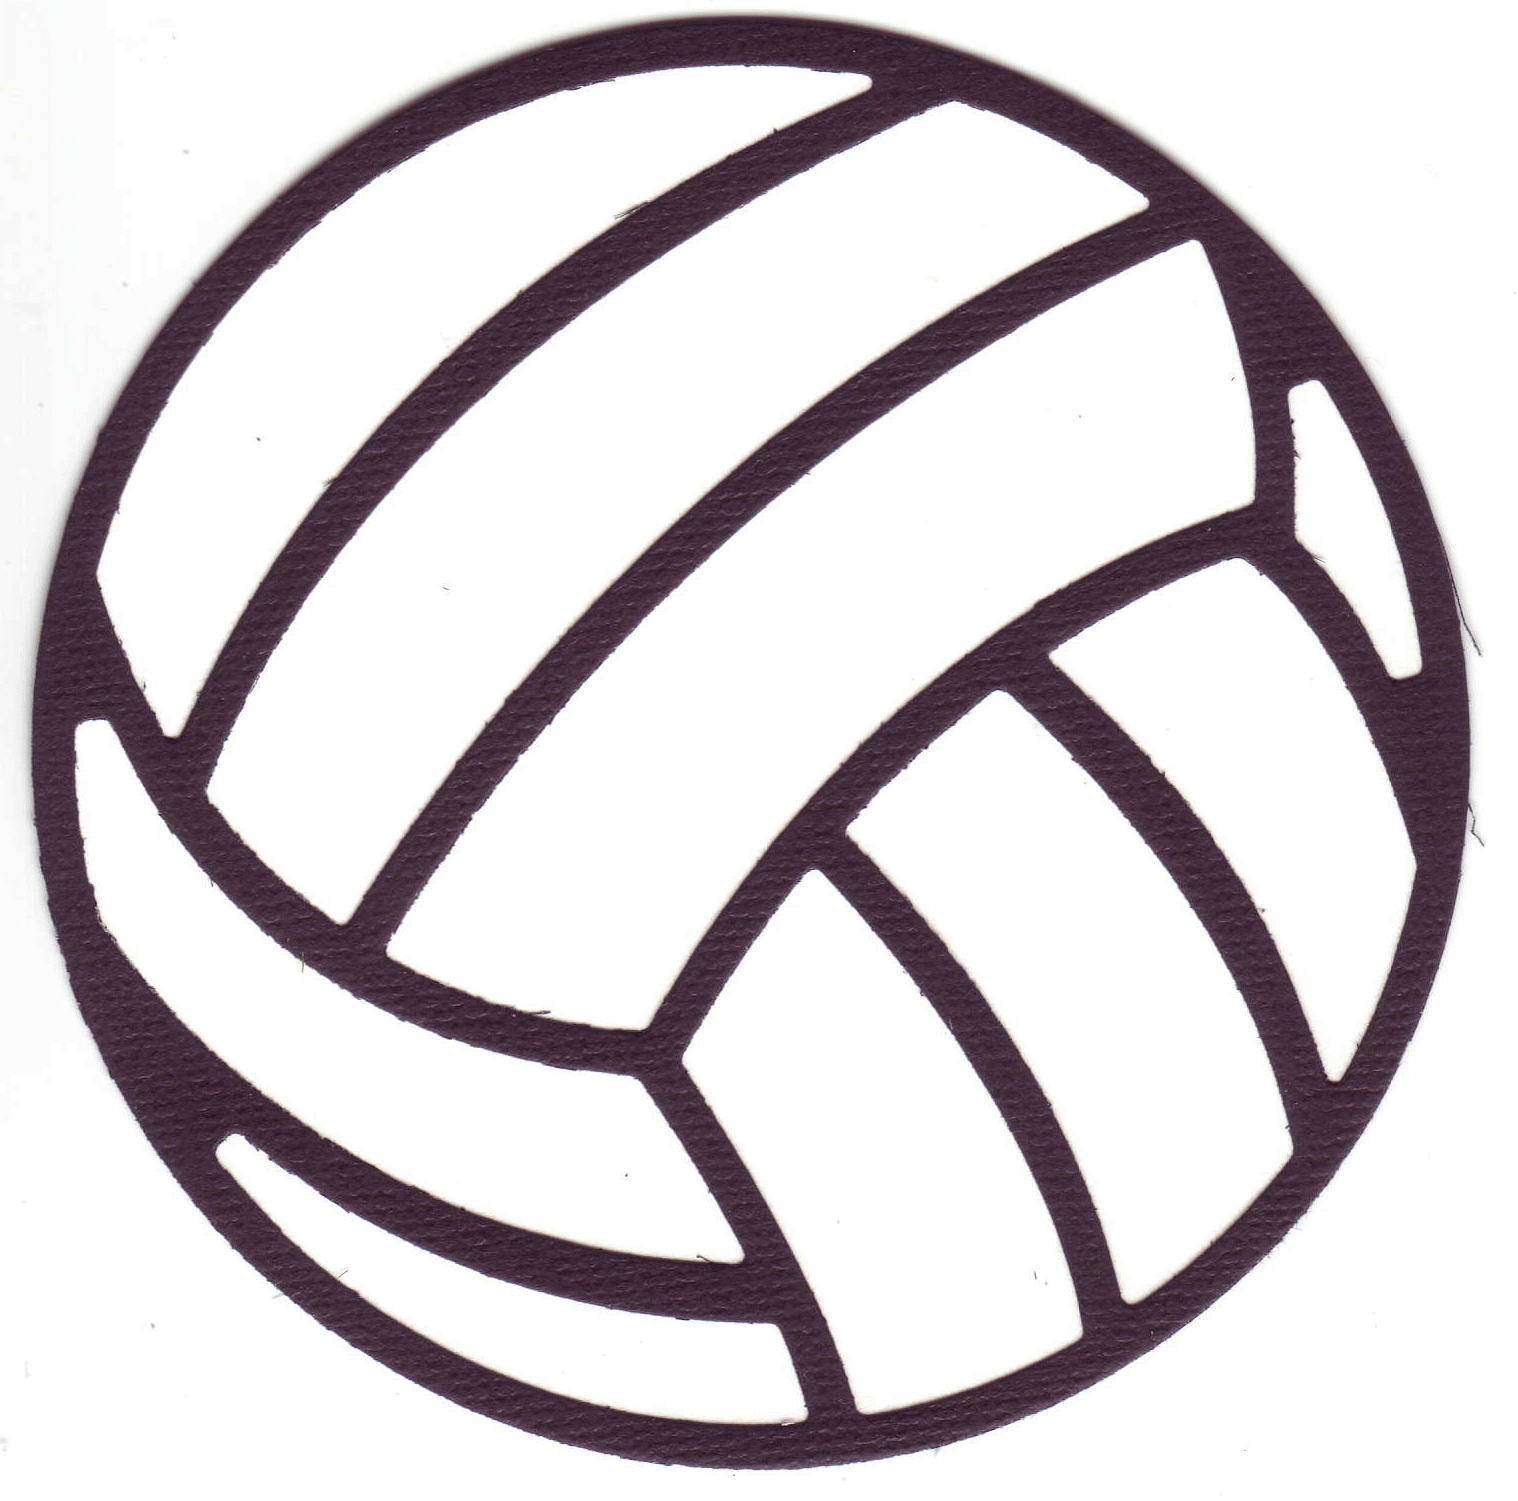 Volleyball Clipart Free .